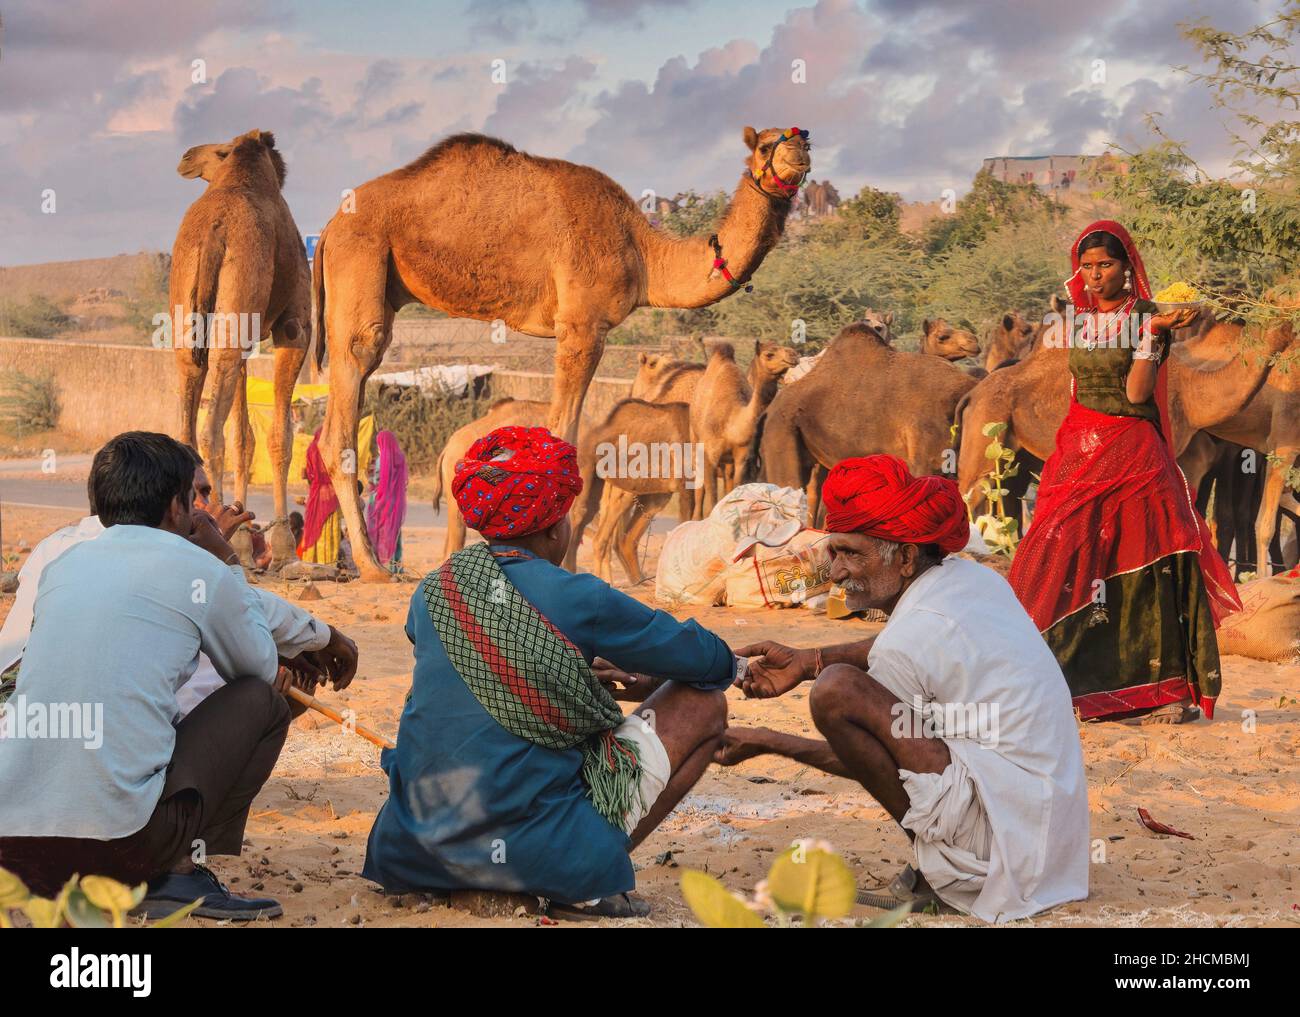 Pushkar, India - November 20, 2015. Rajasthani camel traders with their livestock as a woman walks by with food, in a desert camp at the annual Pushka Stock Photo